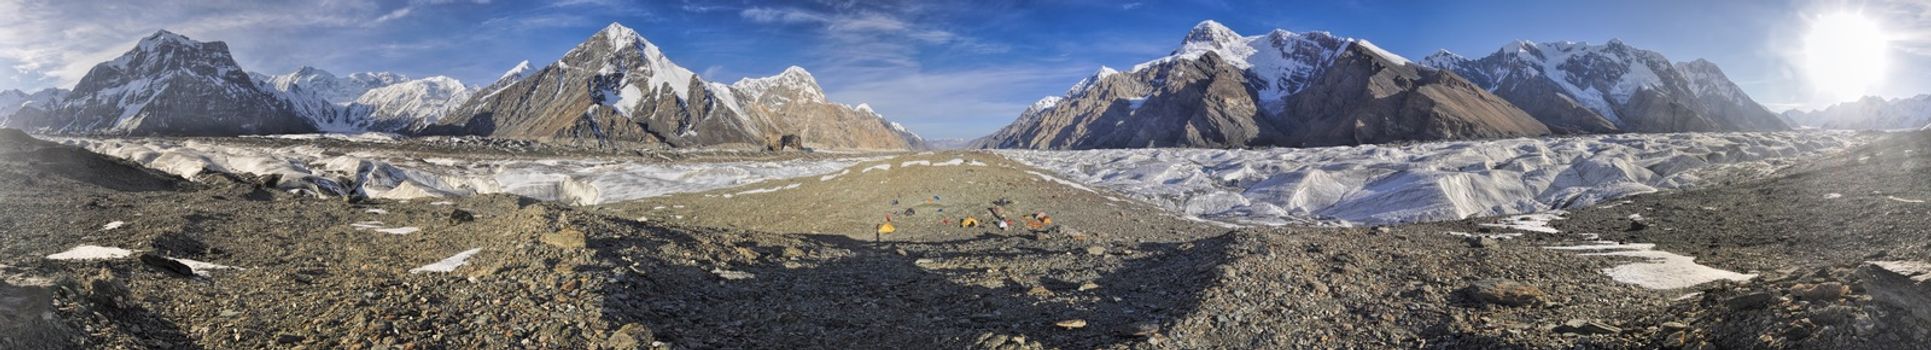 Scenic panorama of campsite on Engilchek glacier in picturesque Tian Shan mountain range in Kyrgyzstan